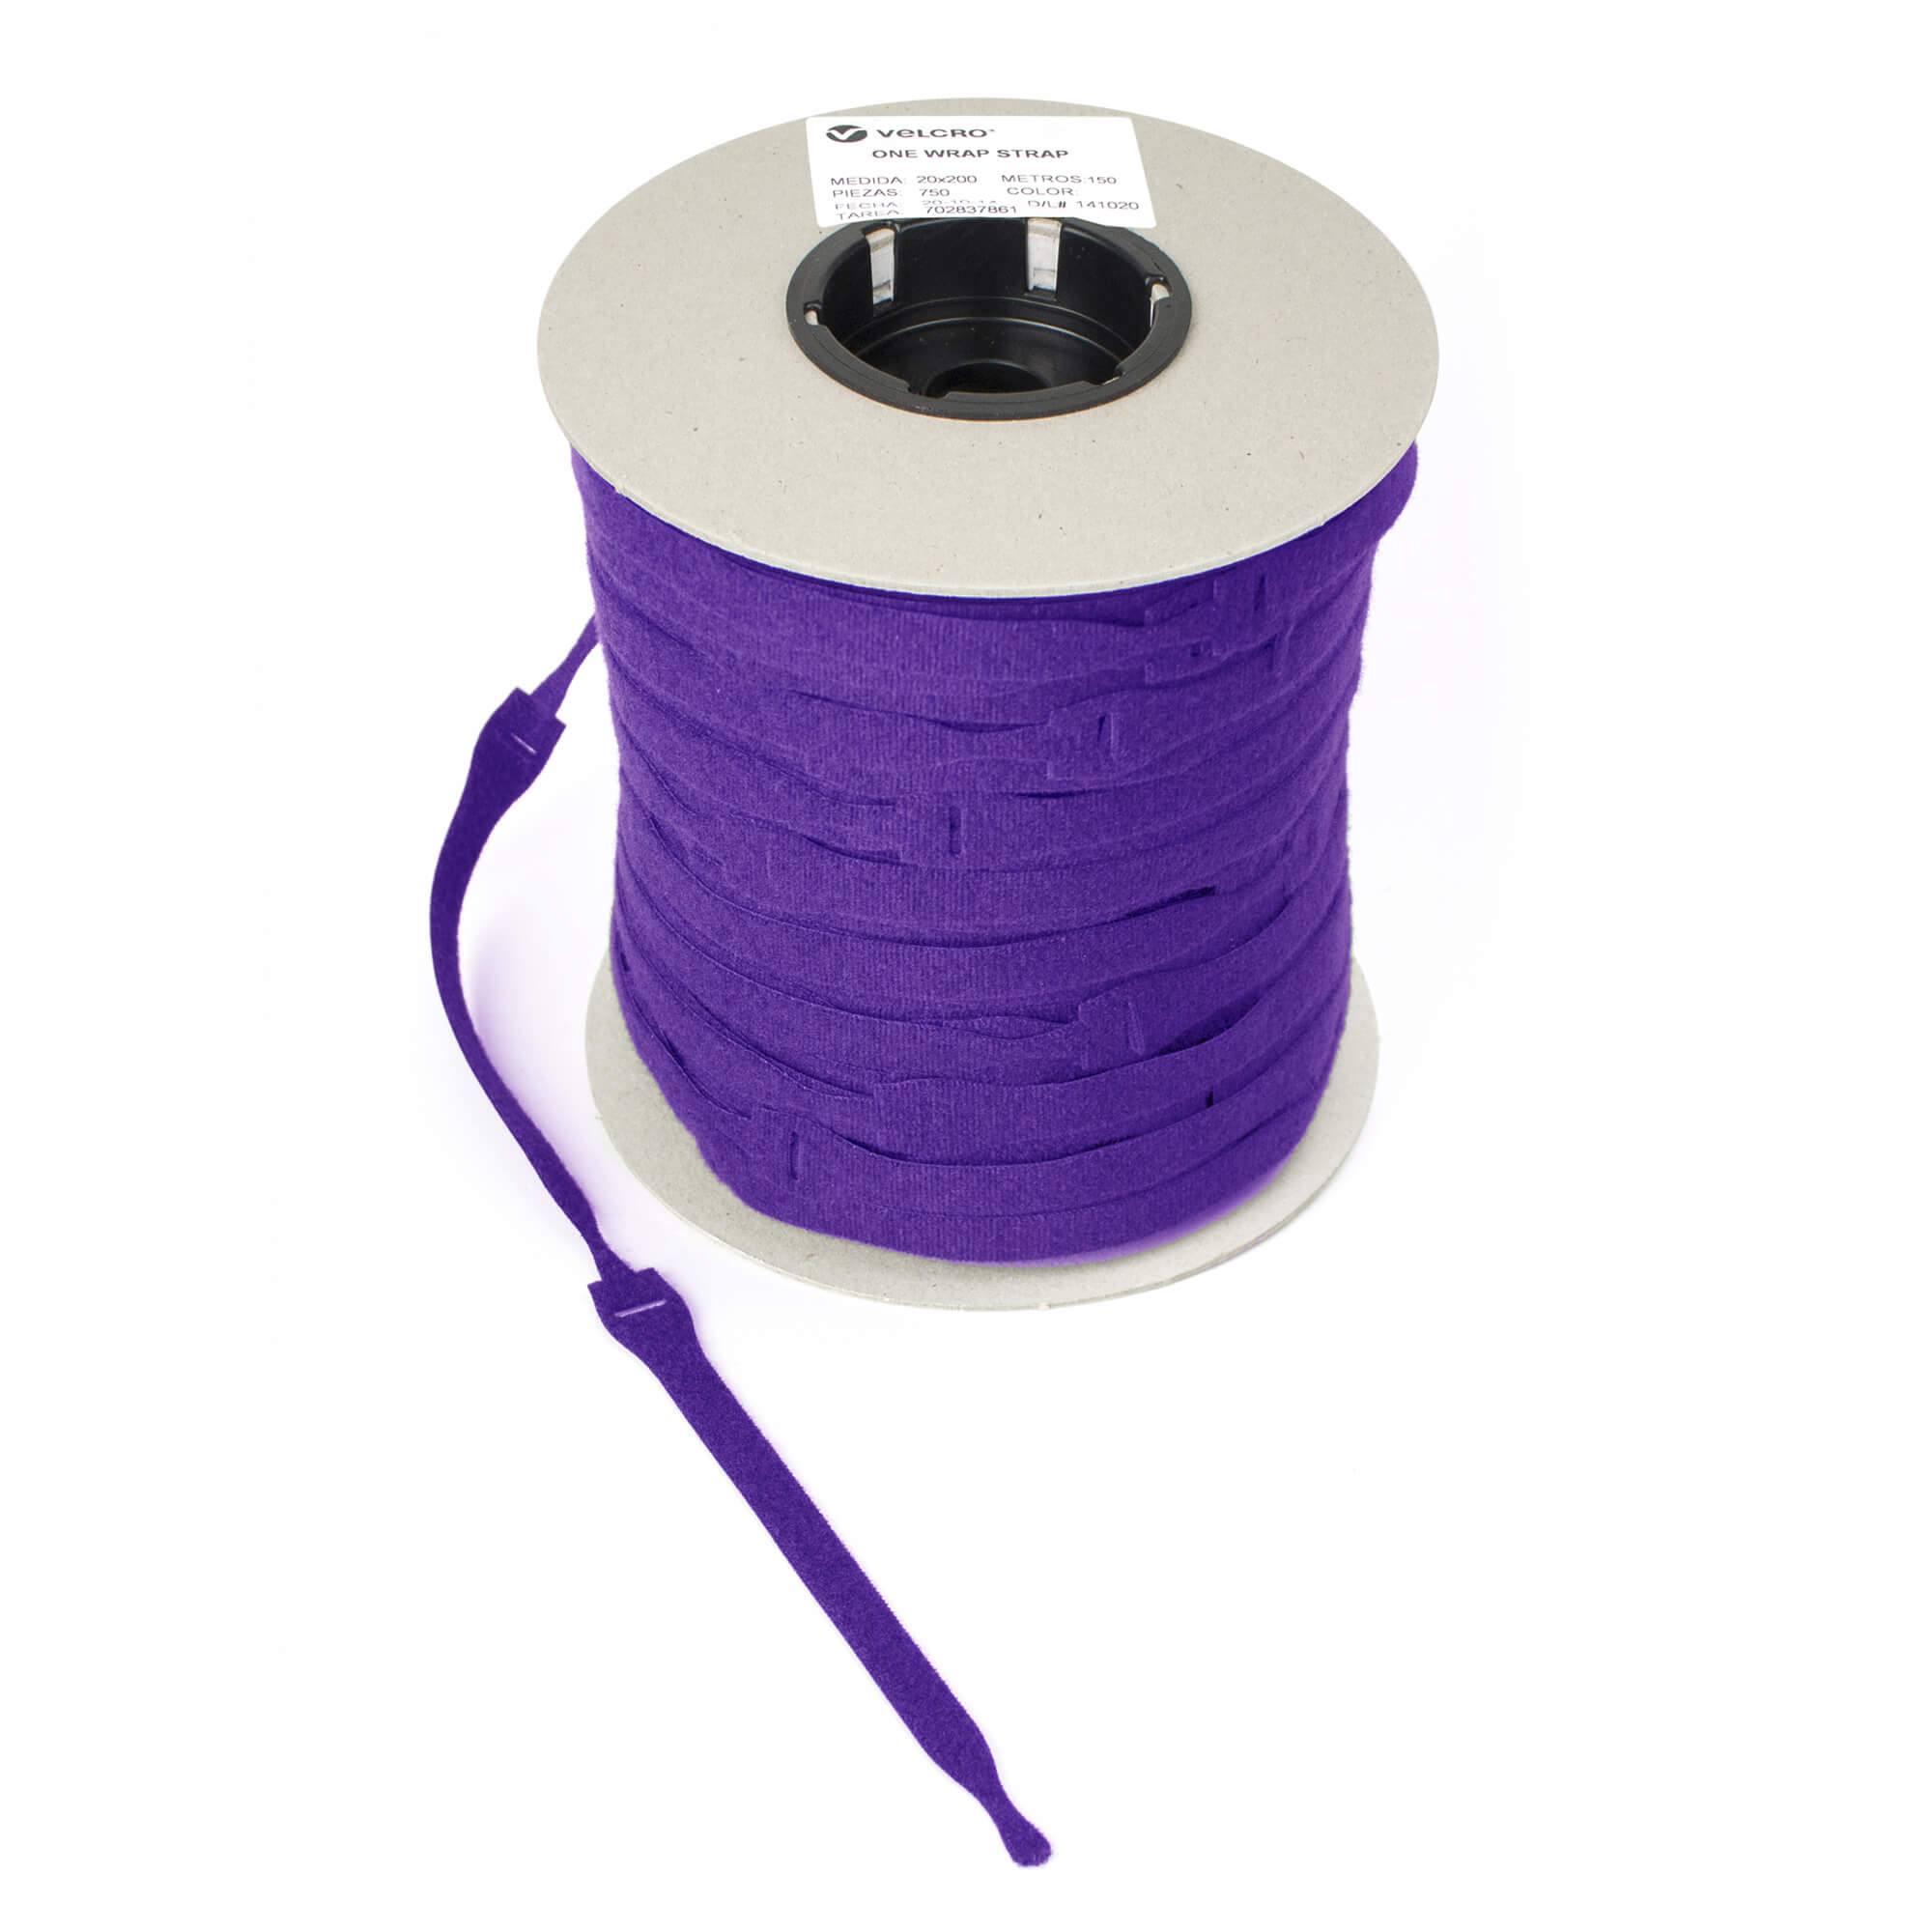 VELCRO® Brand ONE-WRAP® Reusable Cable Ties 20mm x 200mm x 750 - Purple